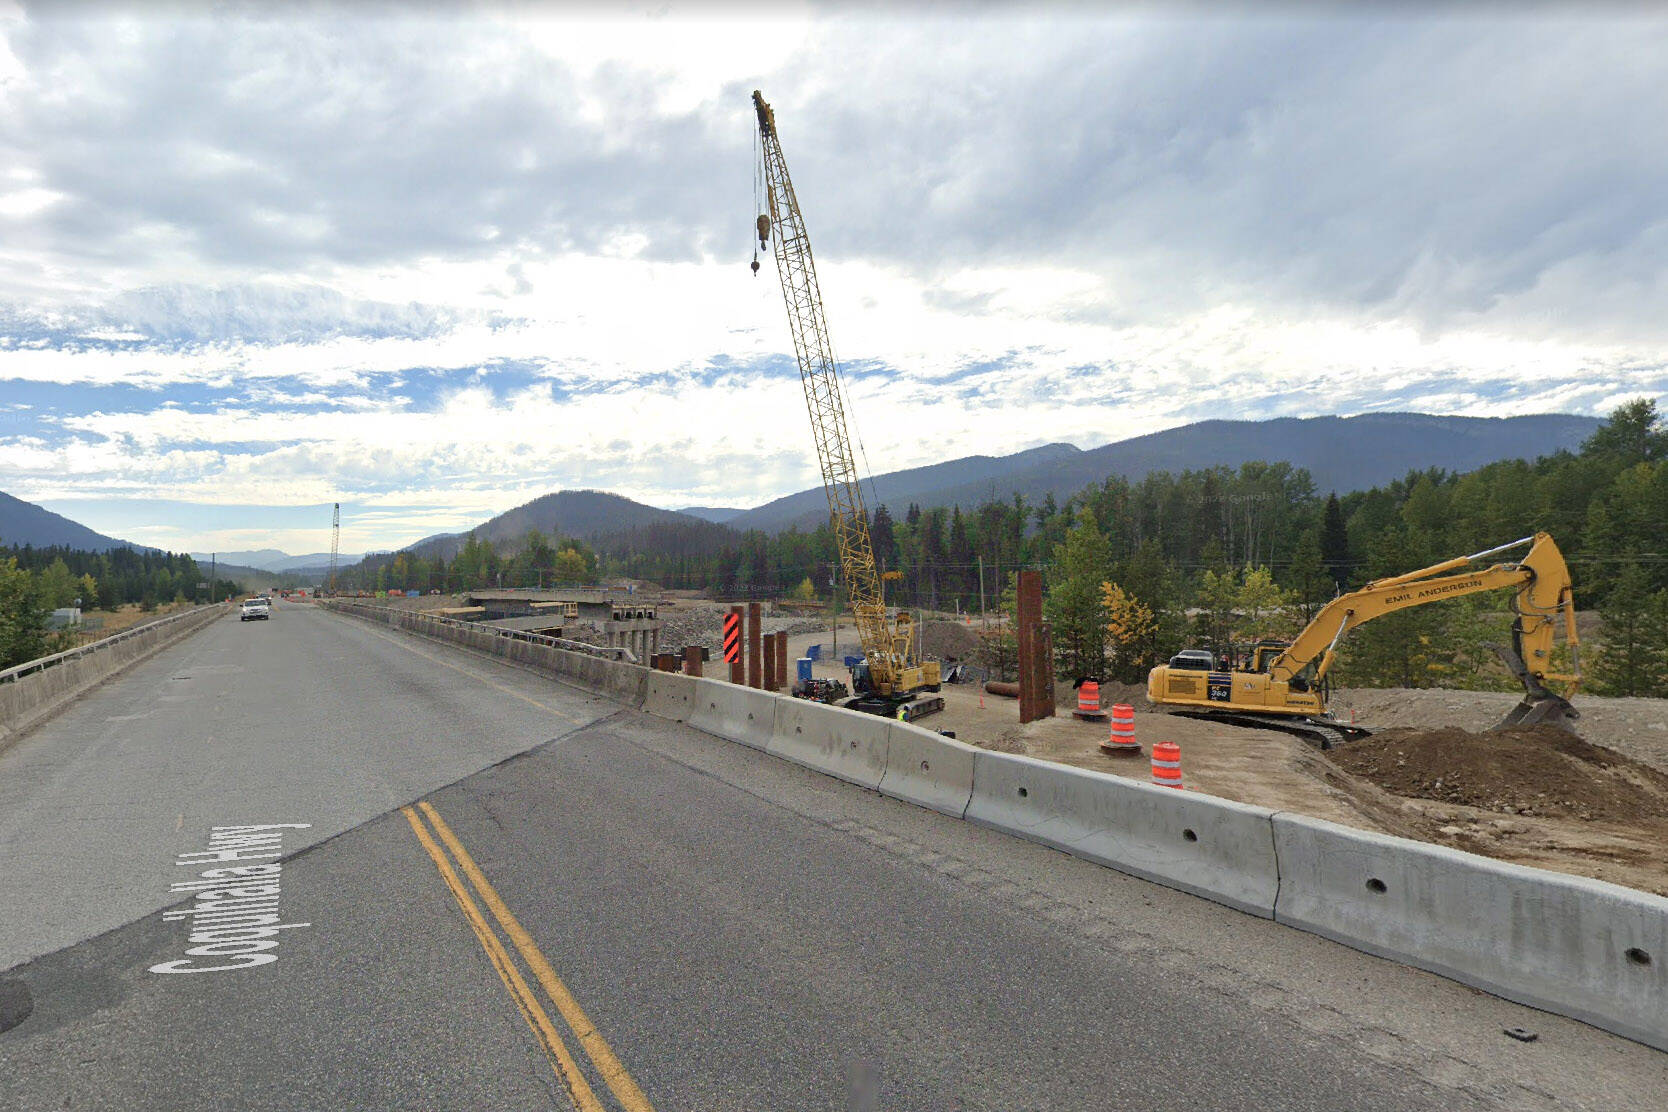 Construction is seen on the Juliet Bridge on the Coquihalla Highway in September 2022. (Google Maps)